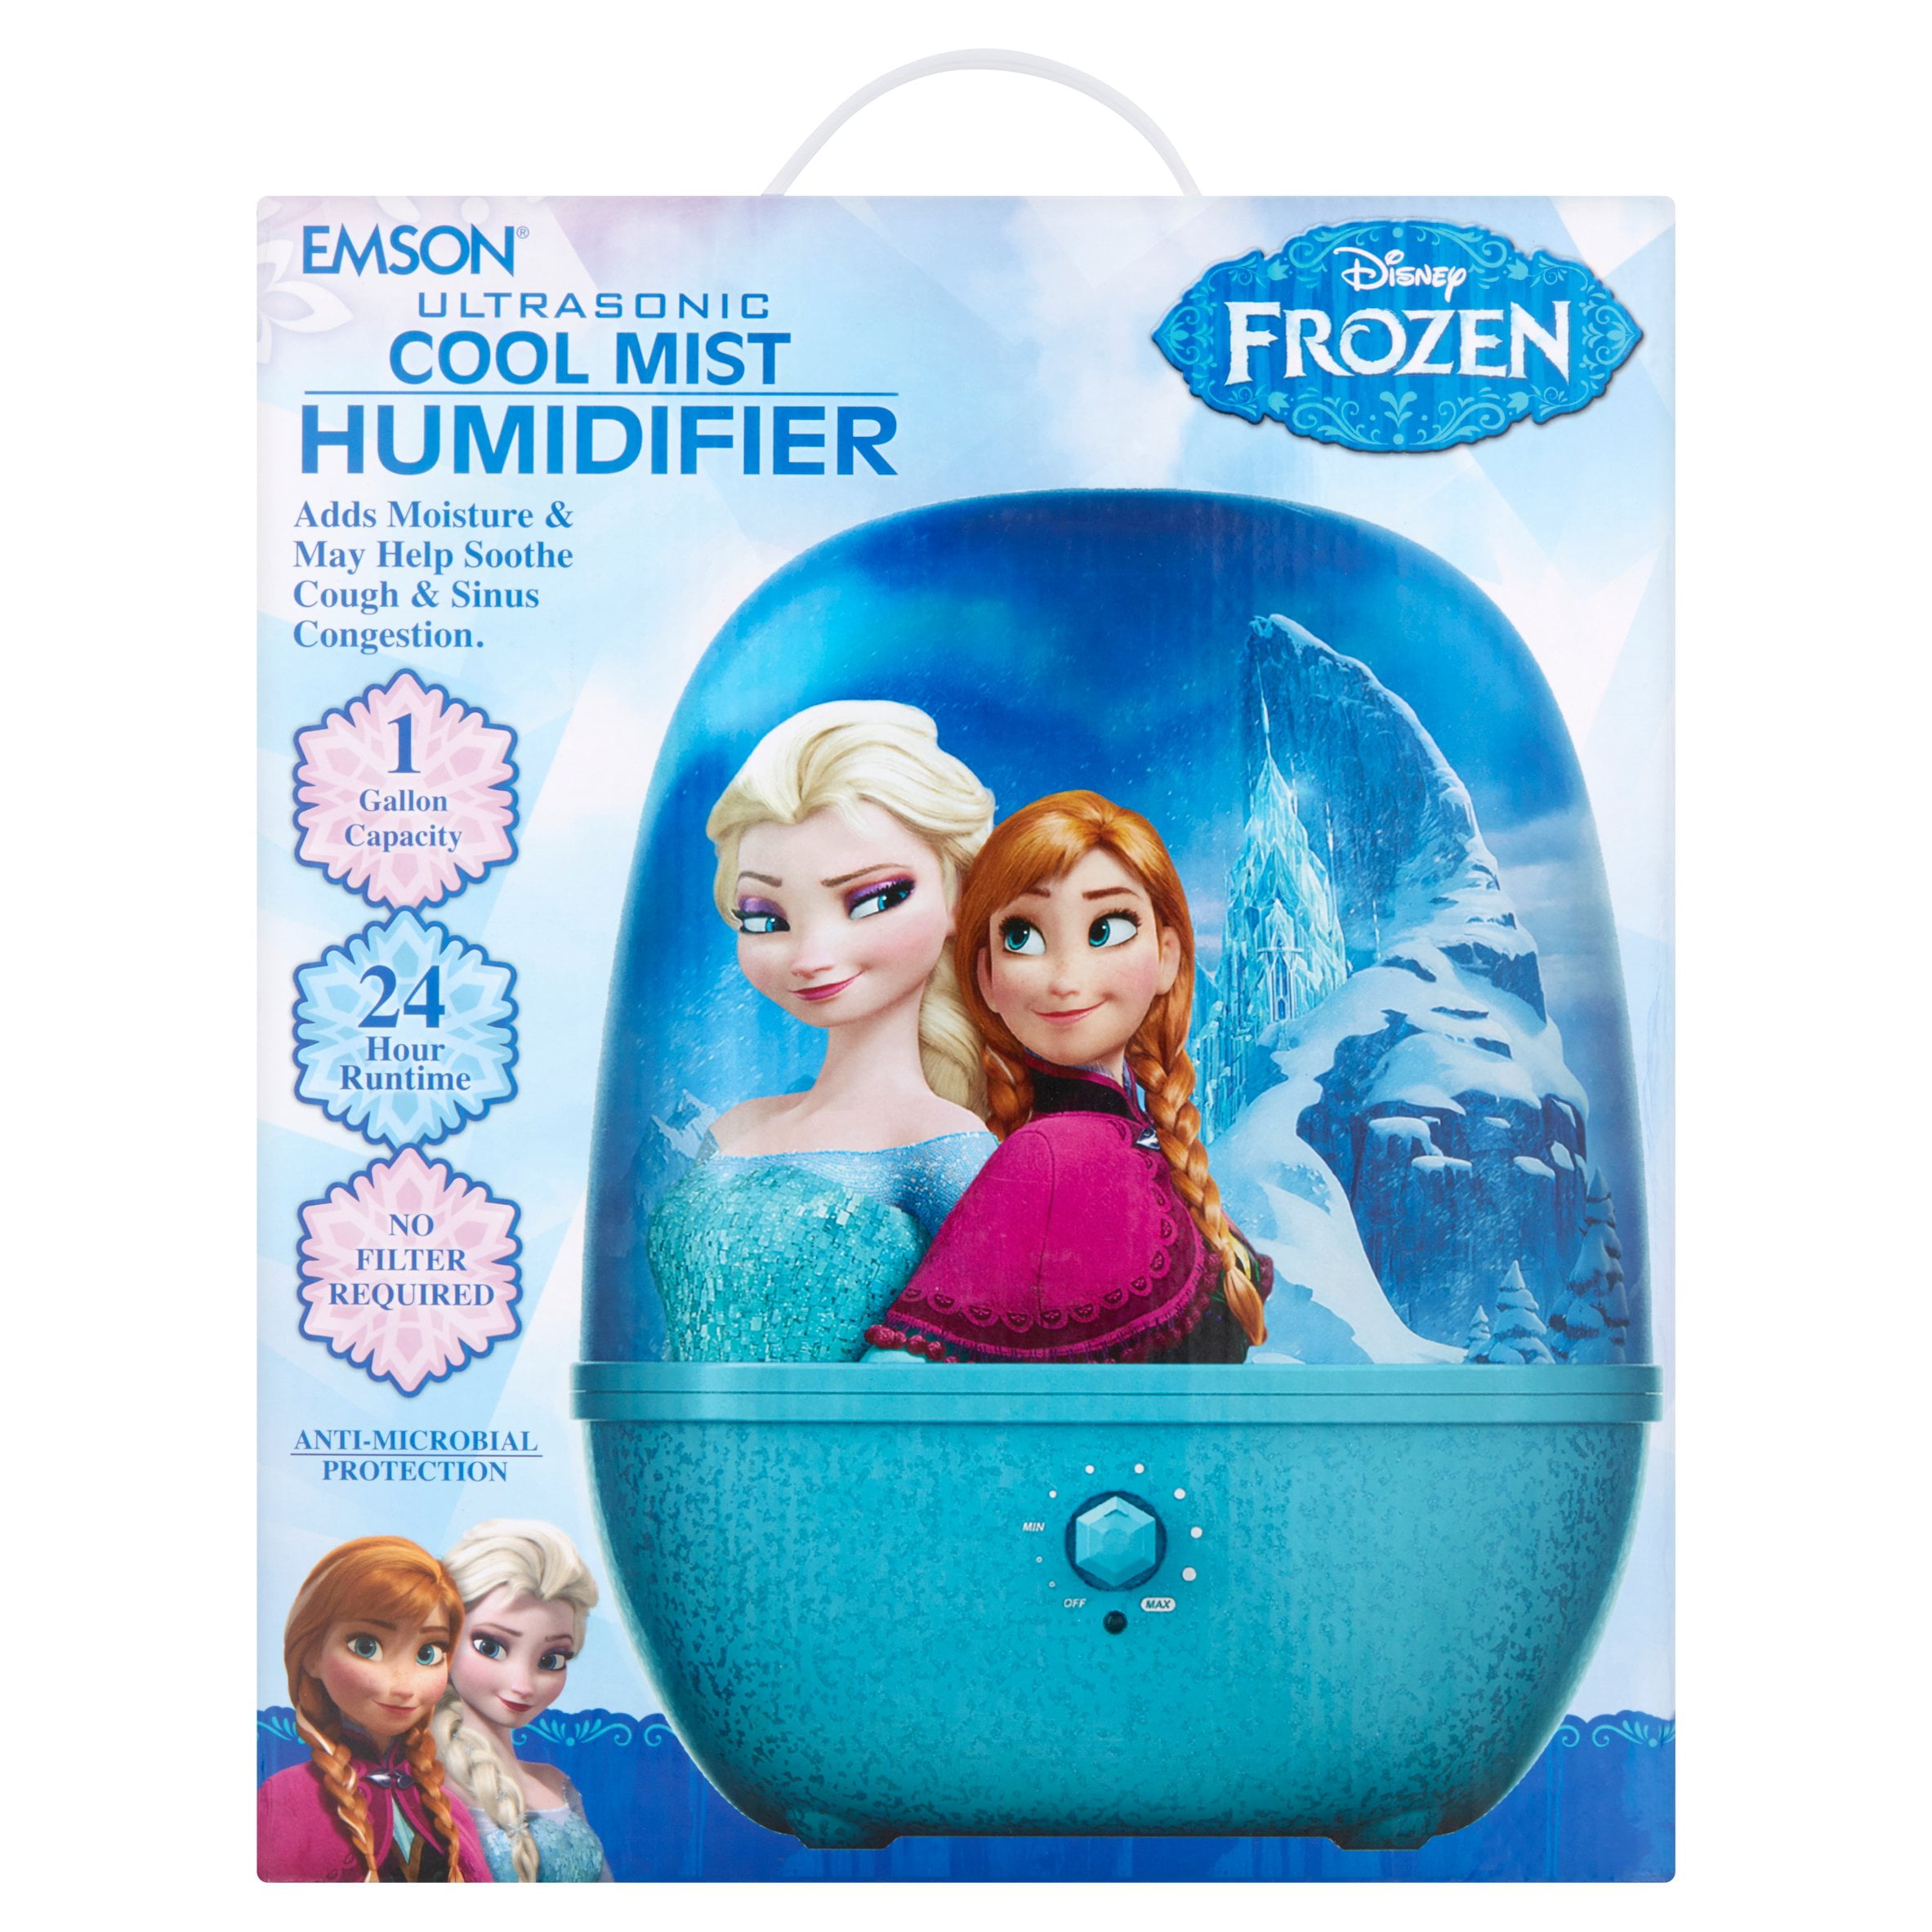 Emson Disney Frozen Olaf Ultrasonic Cool Mist Humidifier Soothe Cough Congestion 